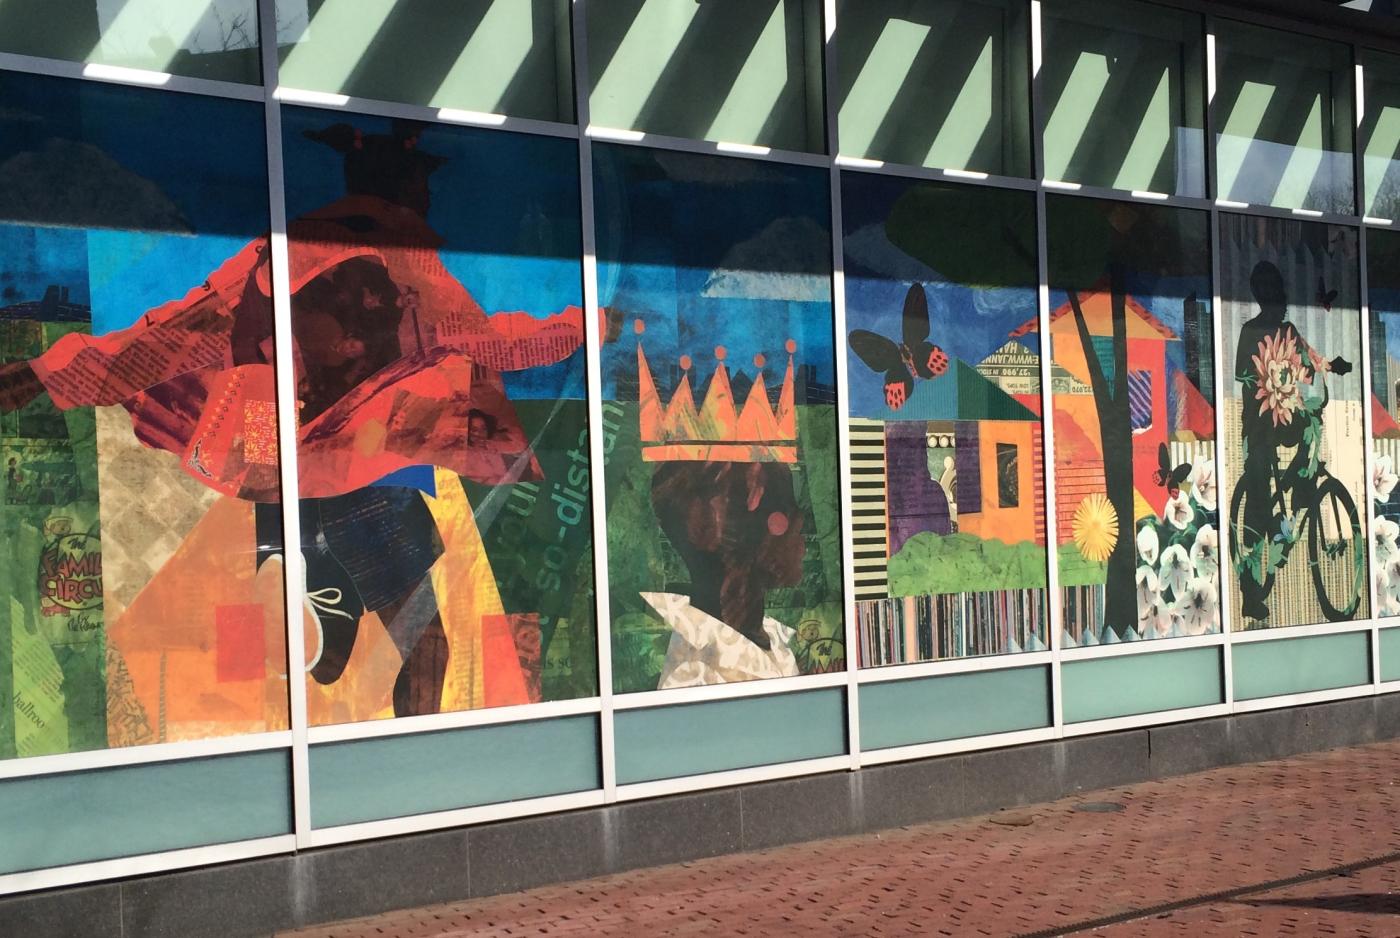 A window mural of Black folks thriving: riding bikes, running through the streets, wearing a crown.